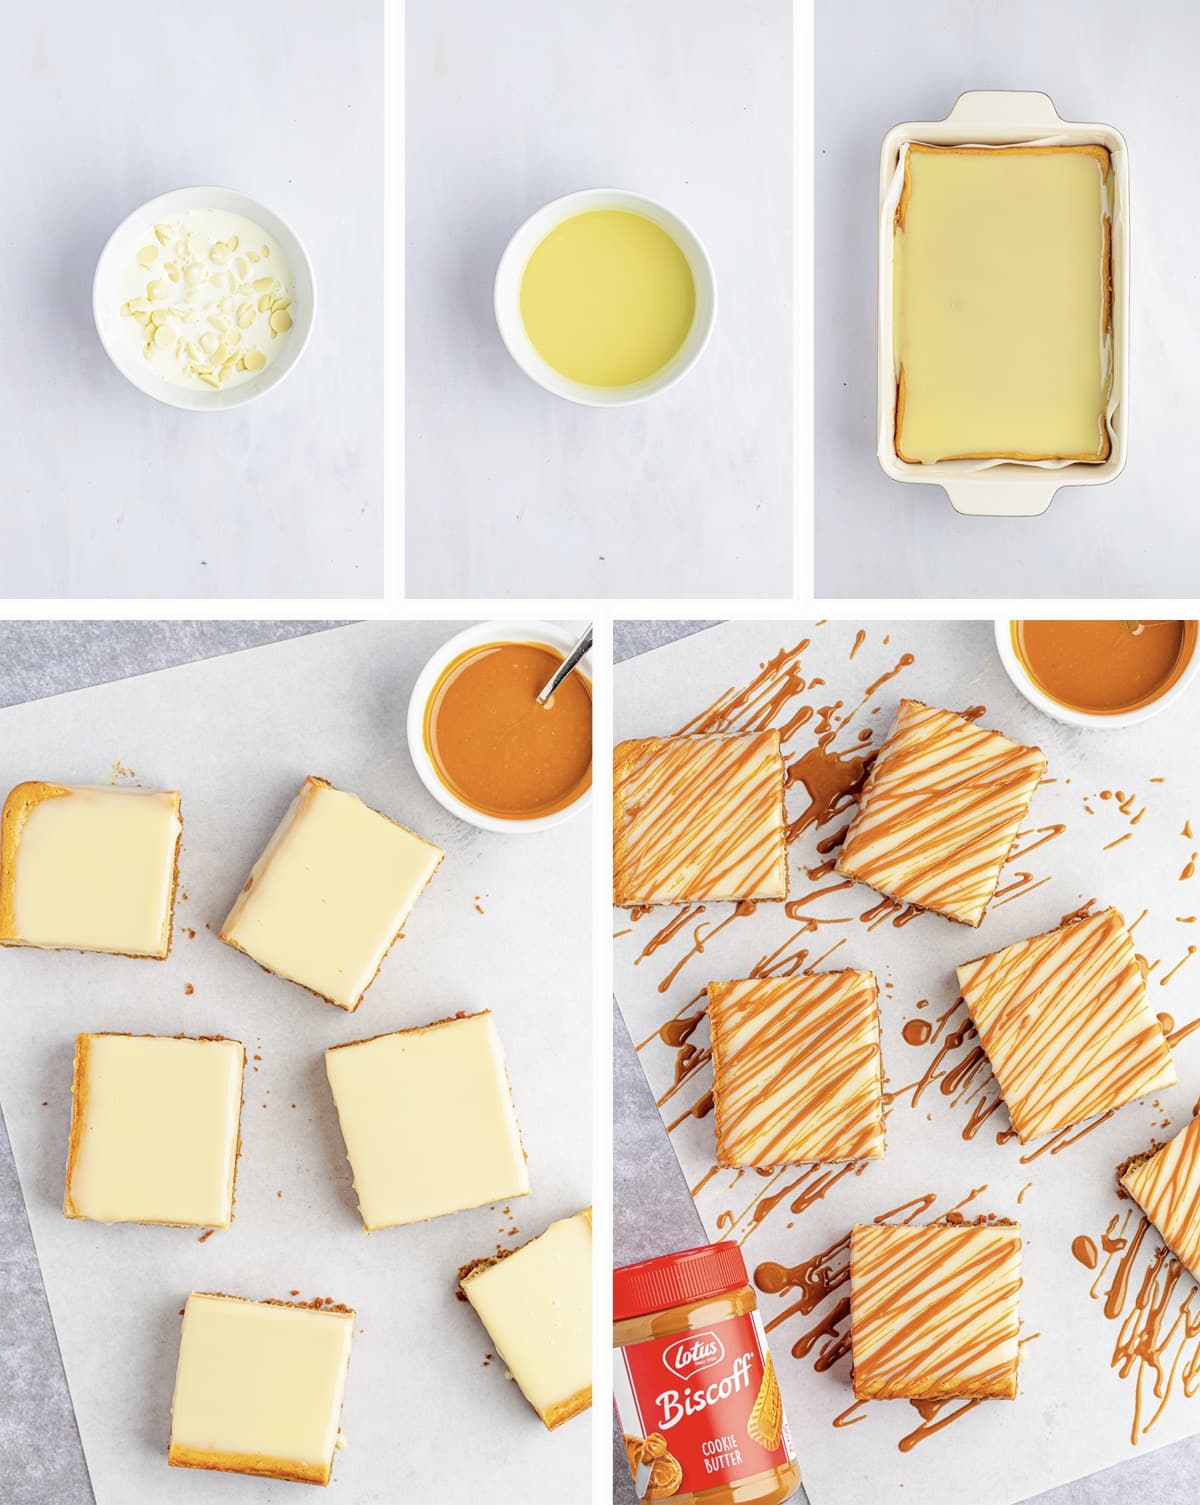 Overhead images showing how to make the white chocolate ganache and final preparations for Biscoff Cheesecake Bars on a white table top